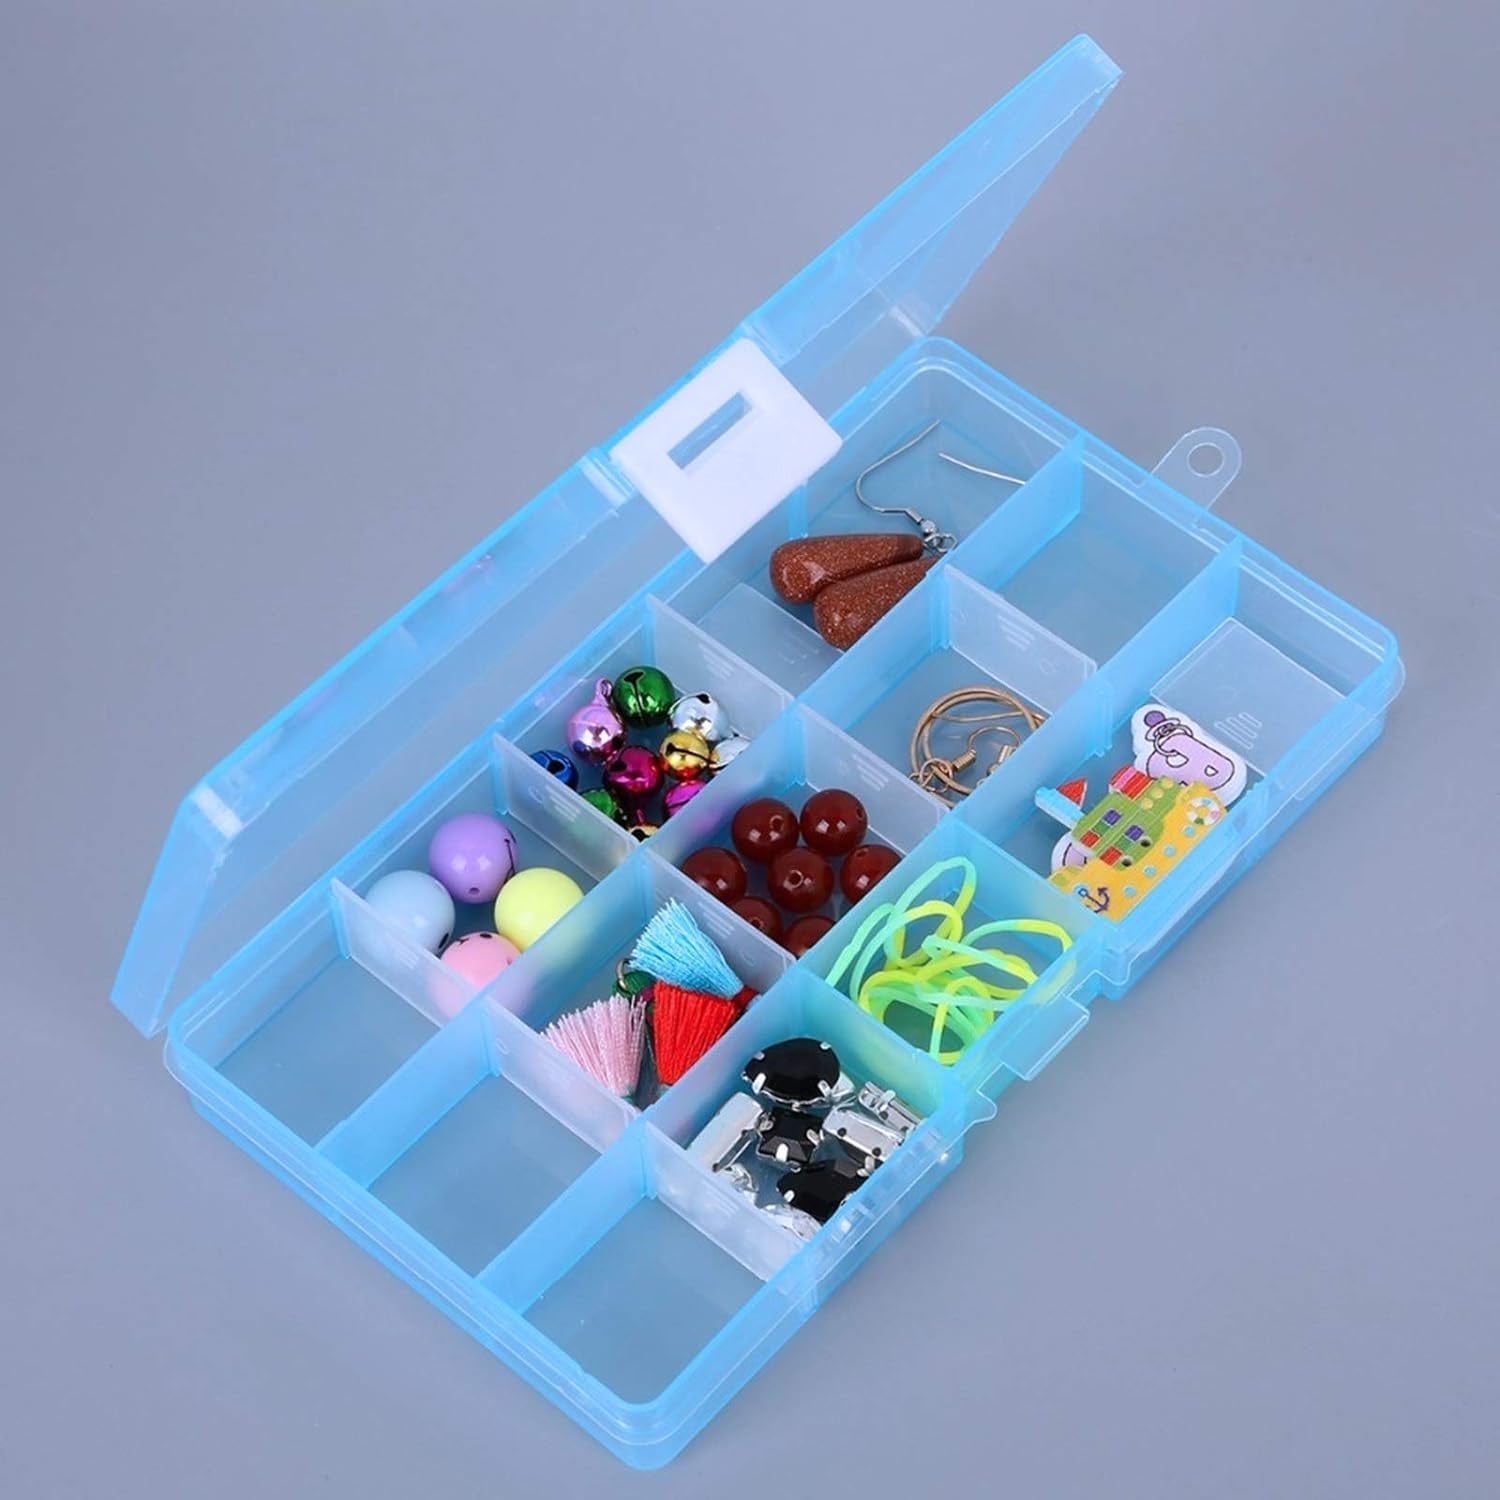 12912 15 Grids Jewelry Organizer Plastic Jewelry Organizer Box Clear Jewelry Organizer Box Plastic Bead Organizers with Adjustable Dividers for Herbs Pills Bead, Jewelry, and Other Small Item (1 Pc)